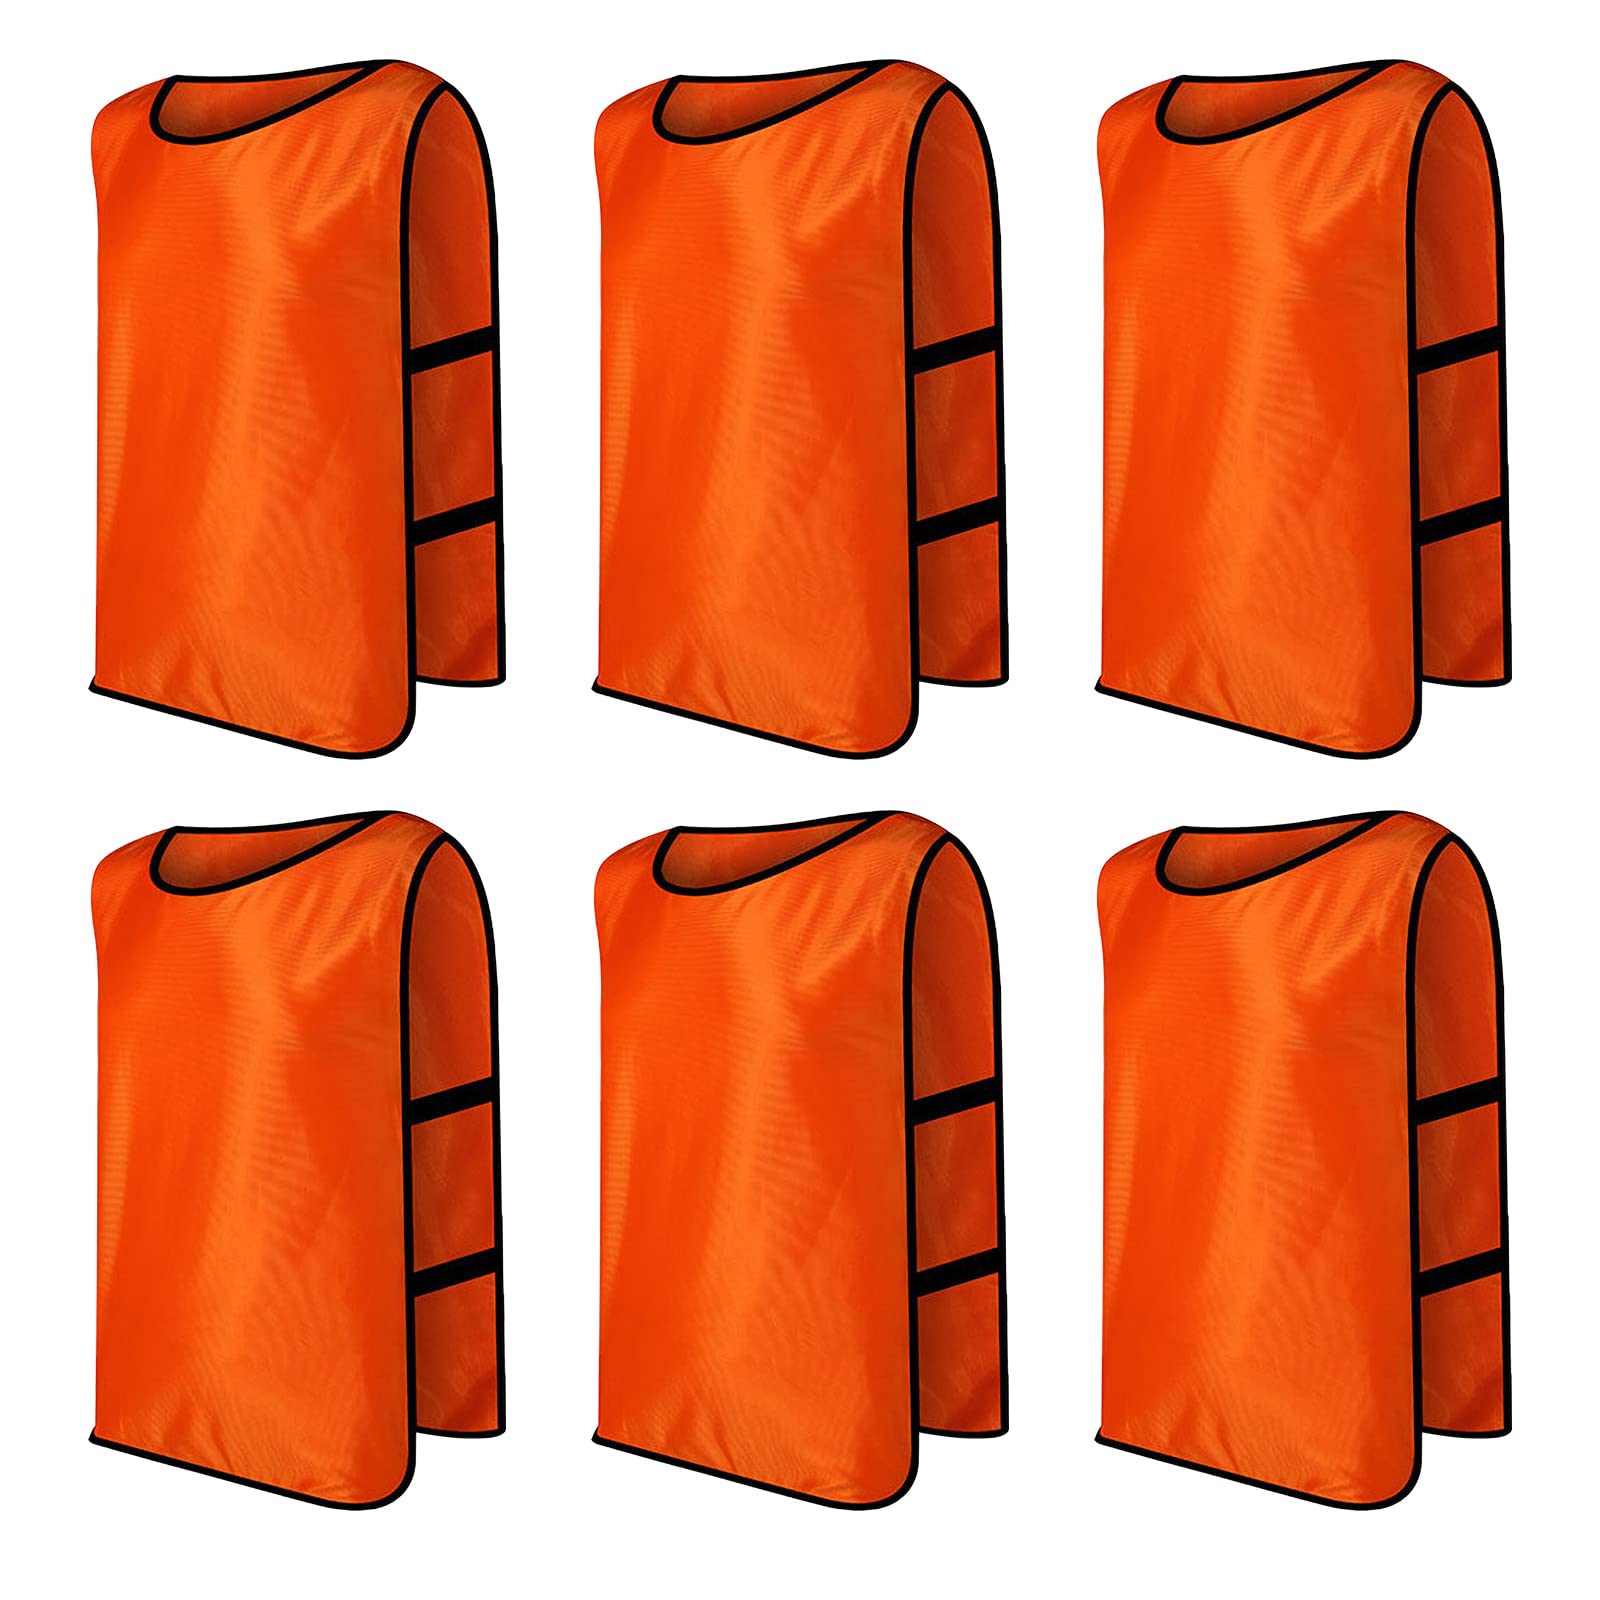 SFAKDTY 6 Pack Football Vest Scrimmage Training Team Practice Pinnies for Soccer Basketball Volleyball with Carry Bag (Orange) 3 - Opticdeals